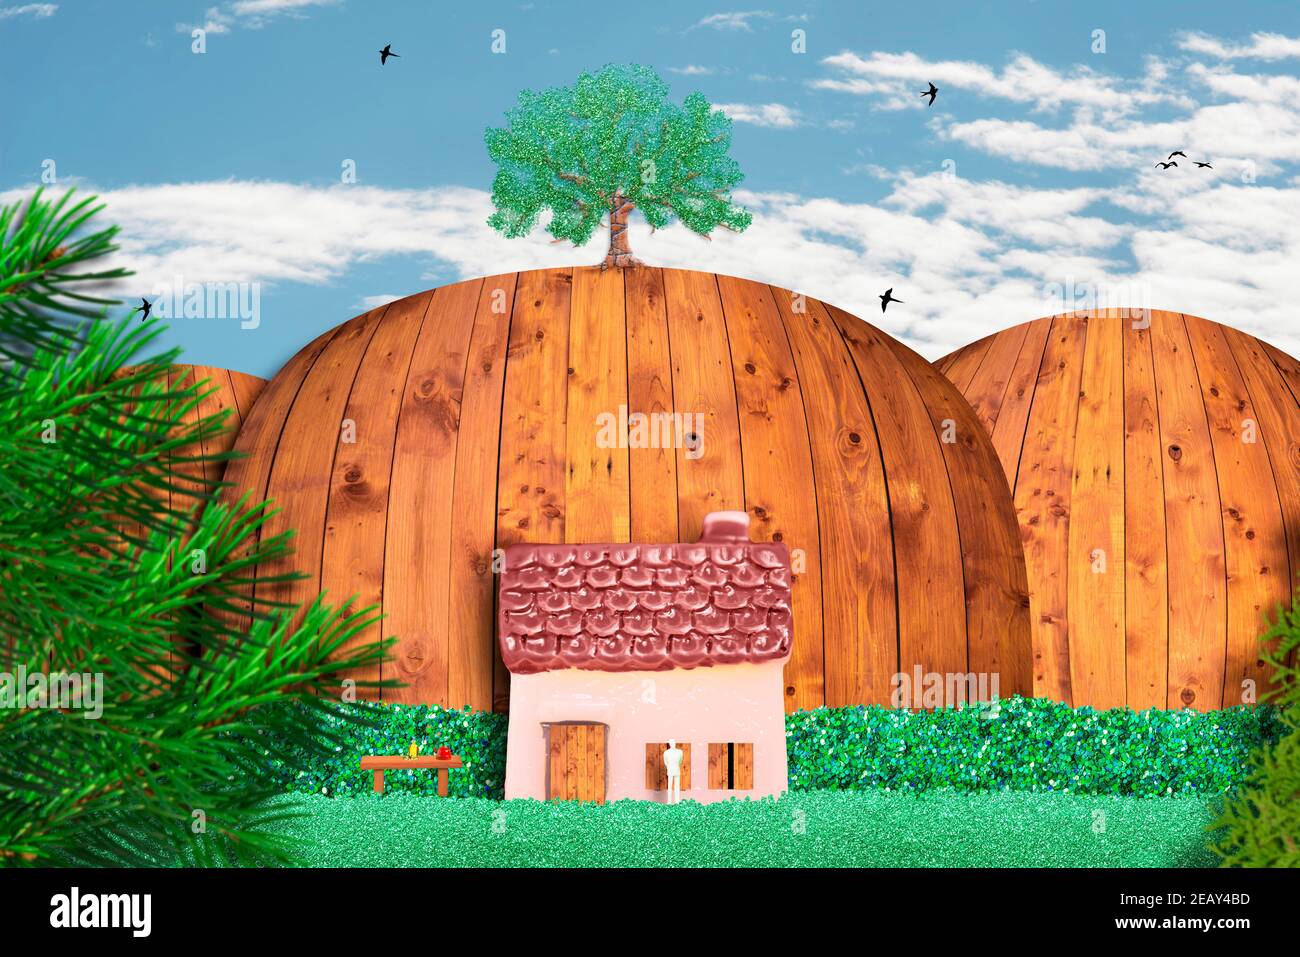 Man in a idyllic landscape with lonely house in nature, quiet life, rest concept. Surreal, abstract image. Stock Photo